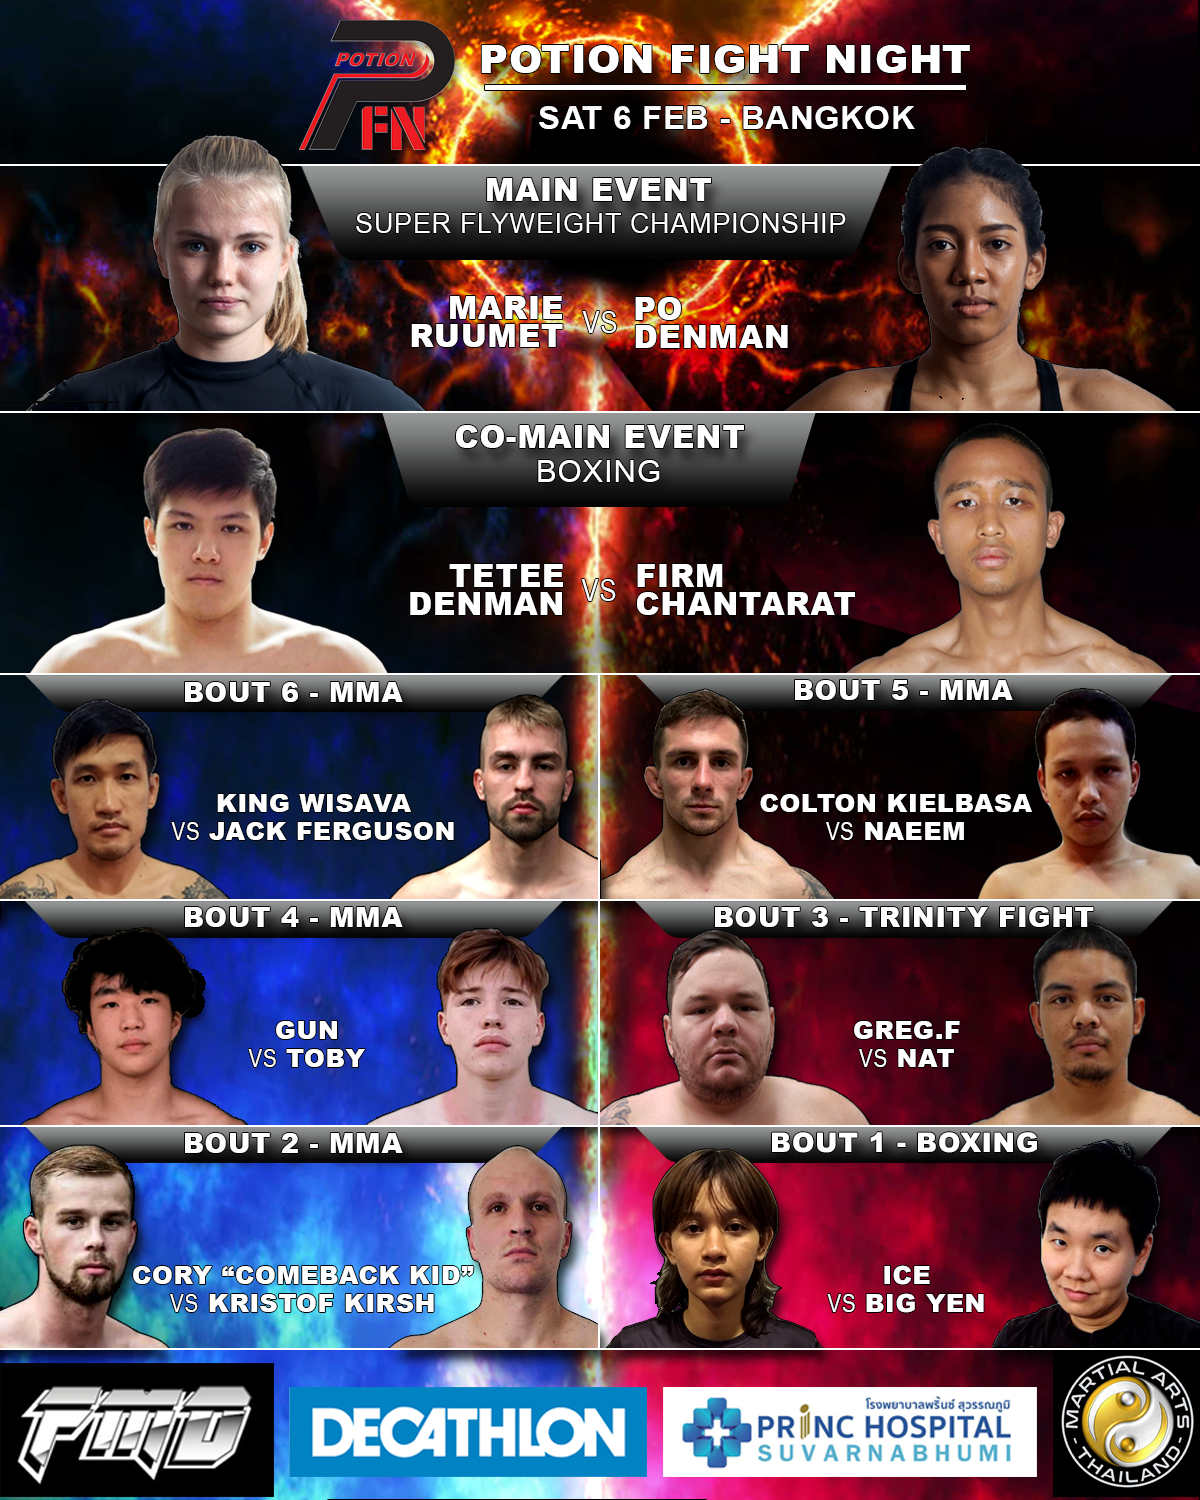 Potion Fight Night fight card poster